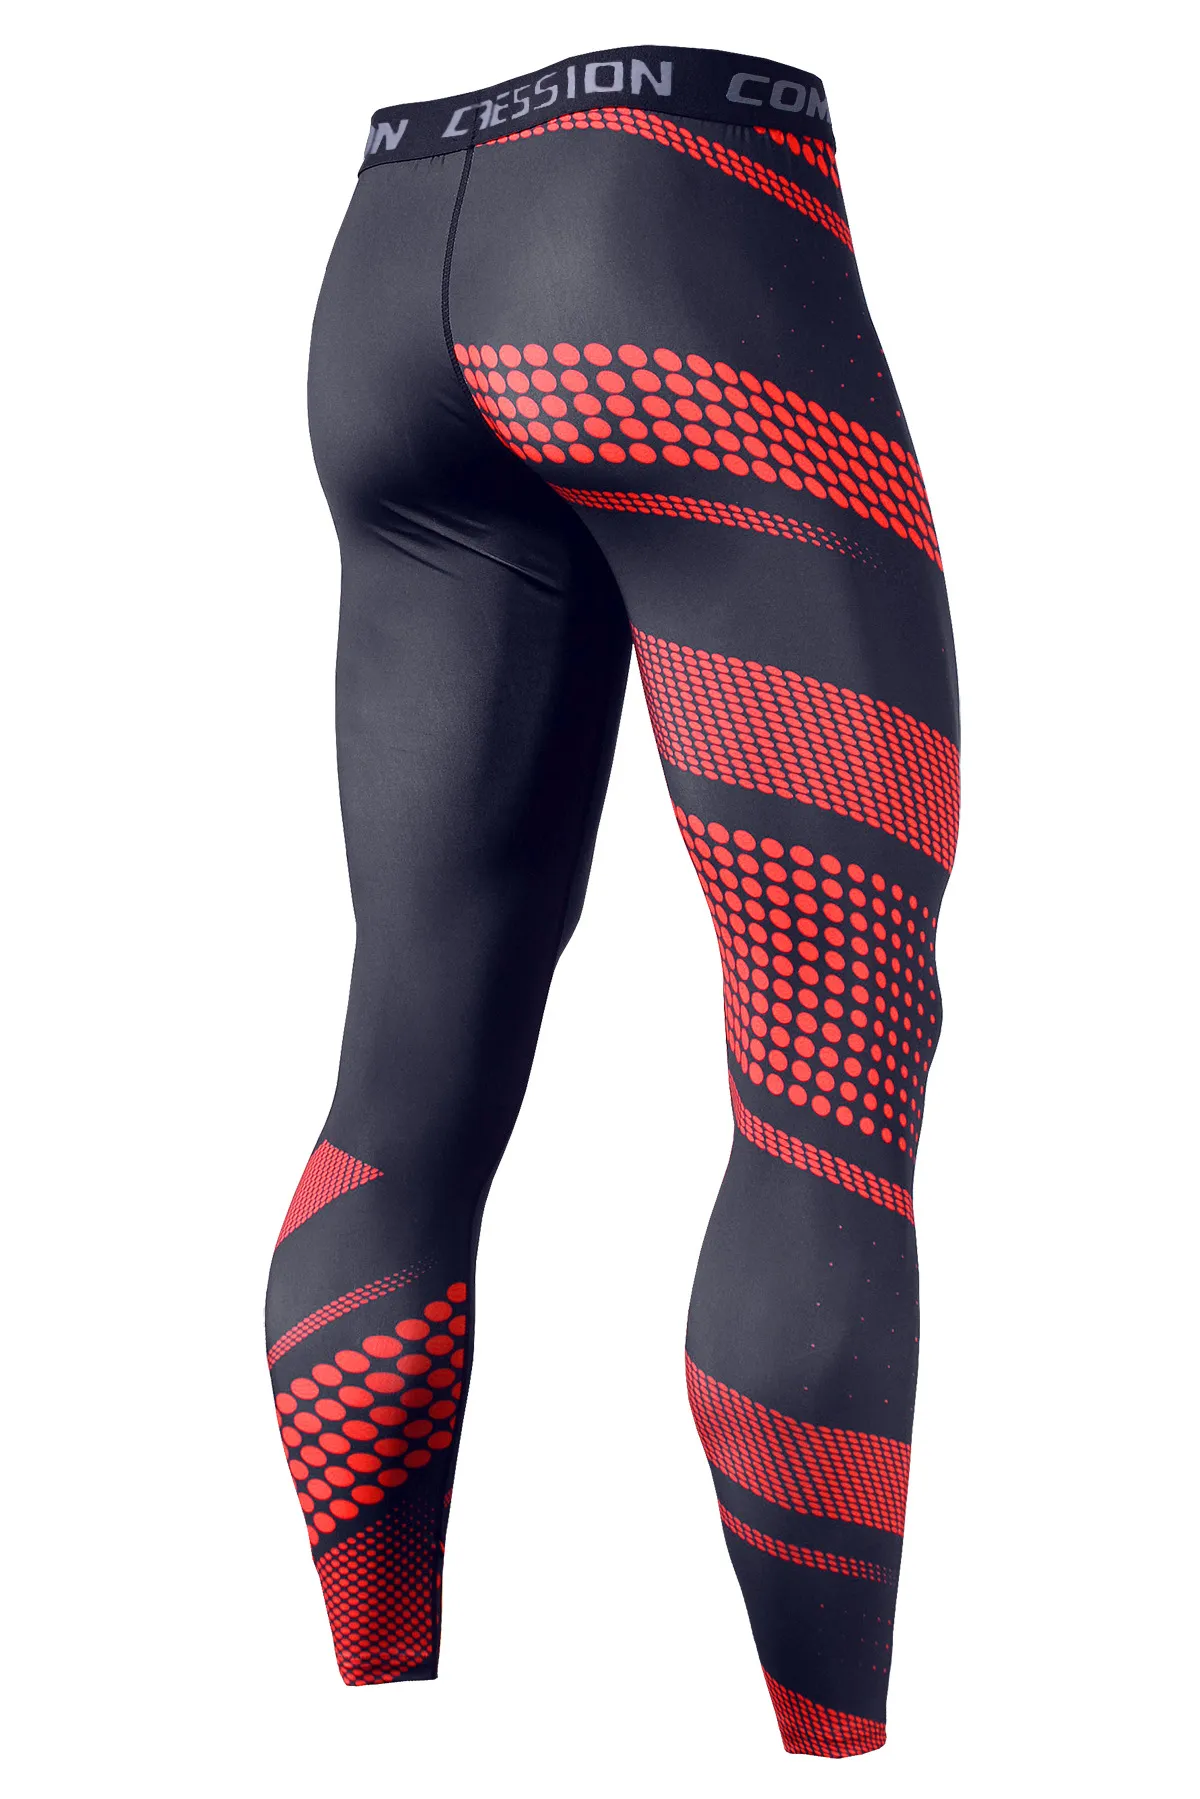 Men's Running Leggings Sportswear Quick Dry Gym Fitness Tights Workout Training Jogging Sports Trousers Compression Sport Pants